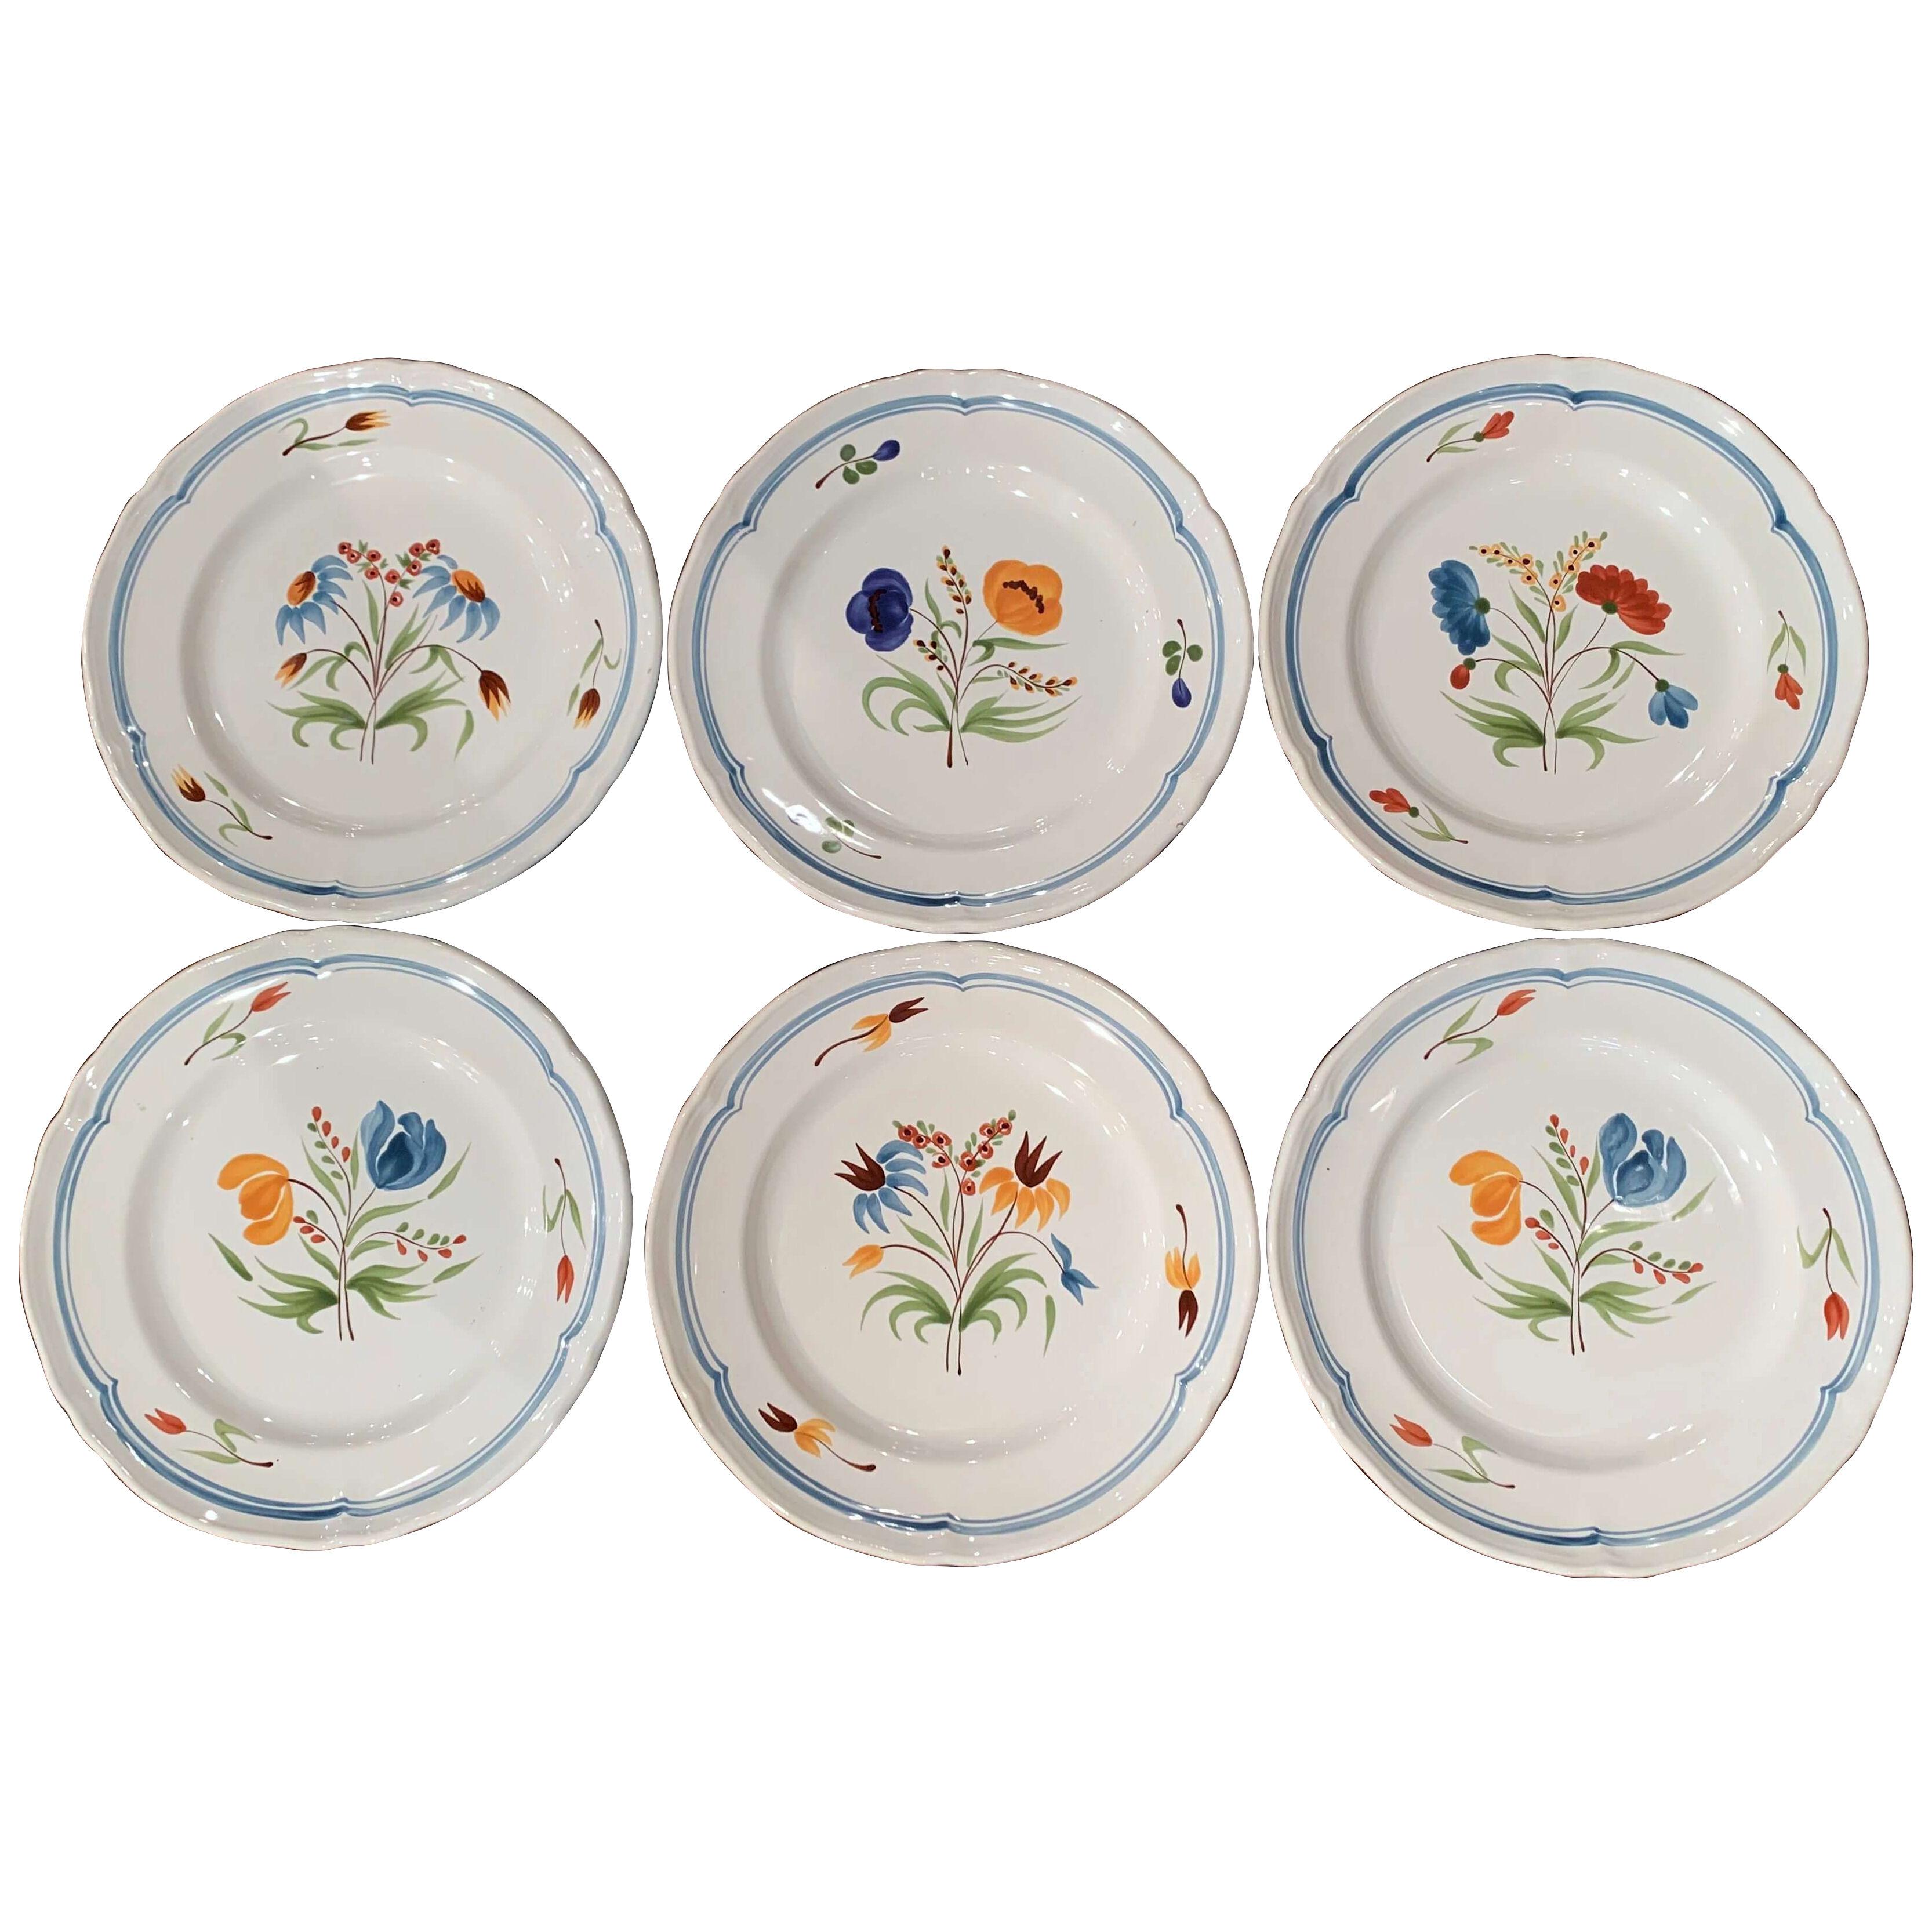 Set of Six French Hand Painted Ceramic Plates from Brittany